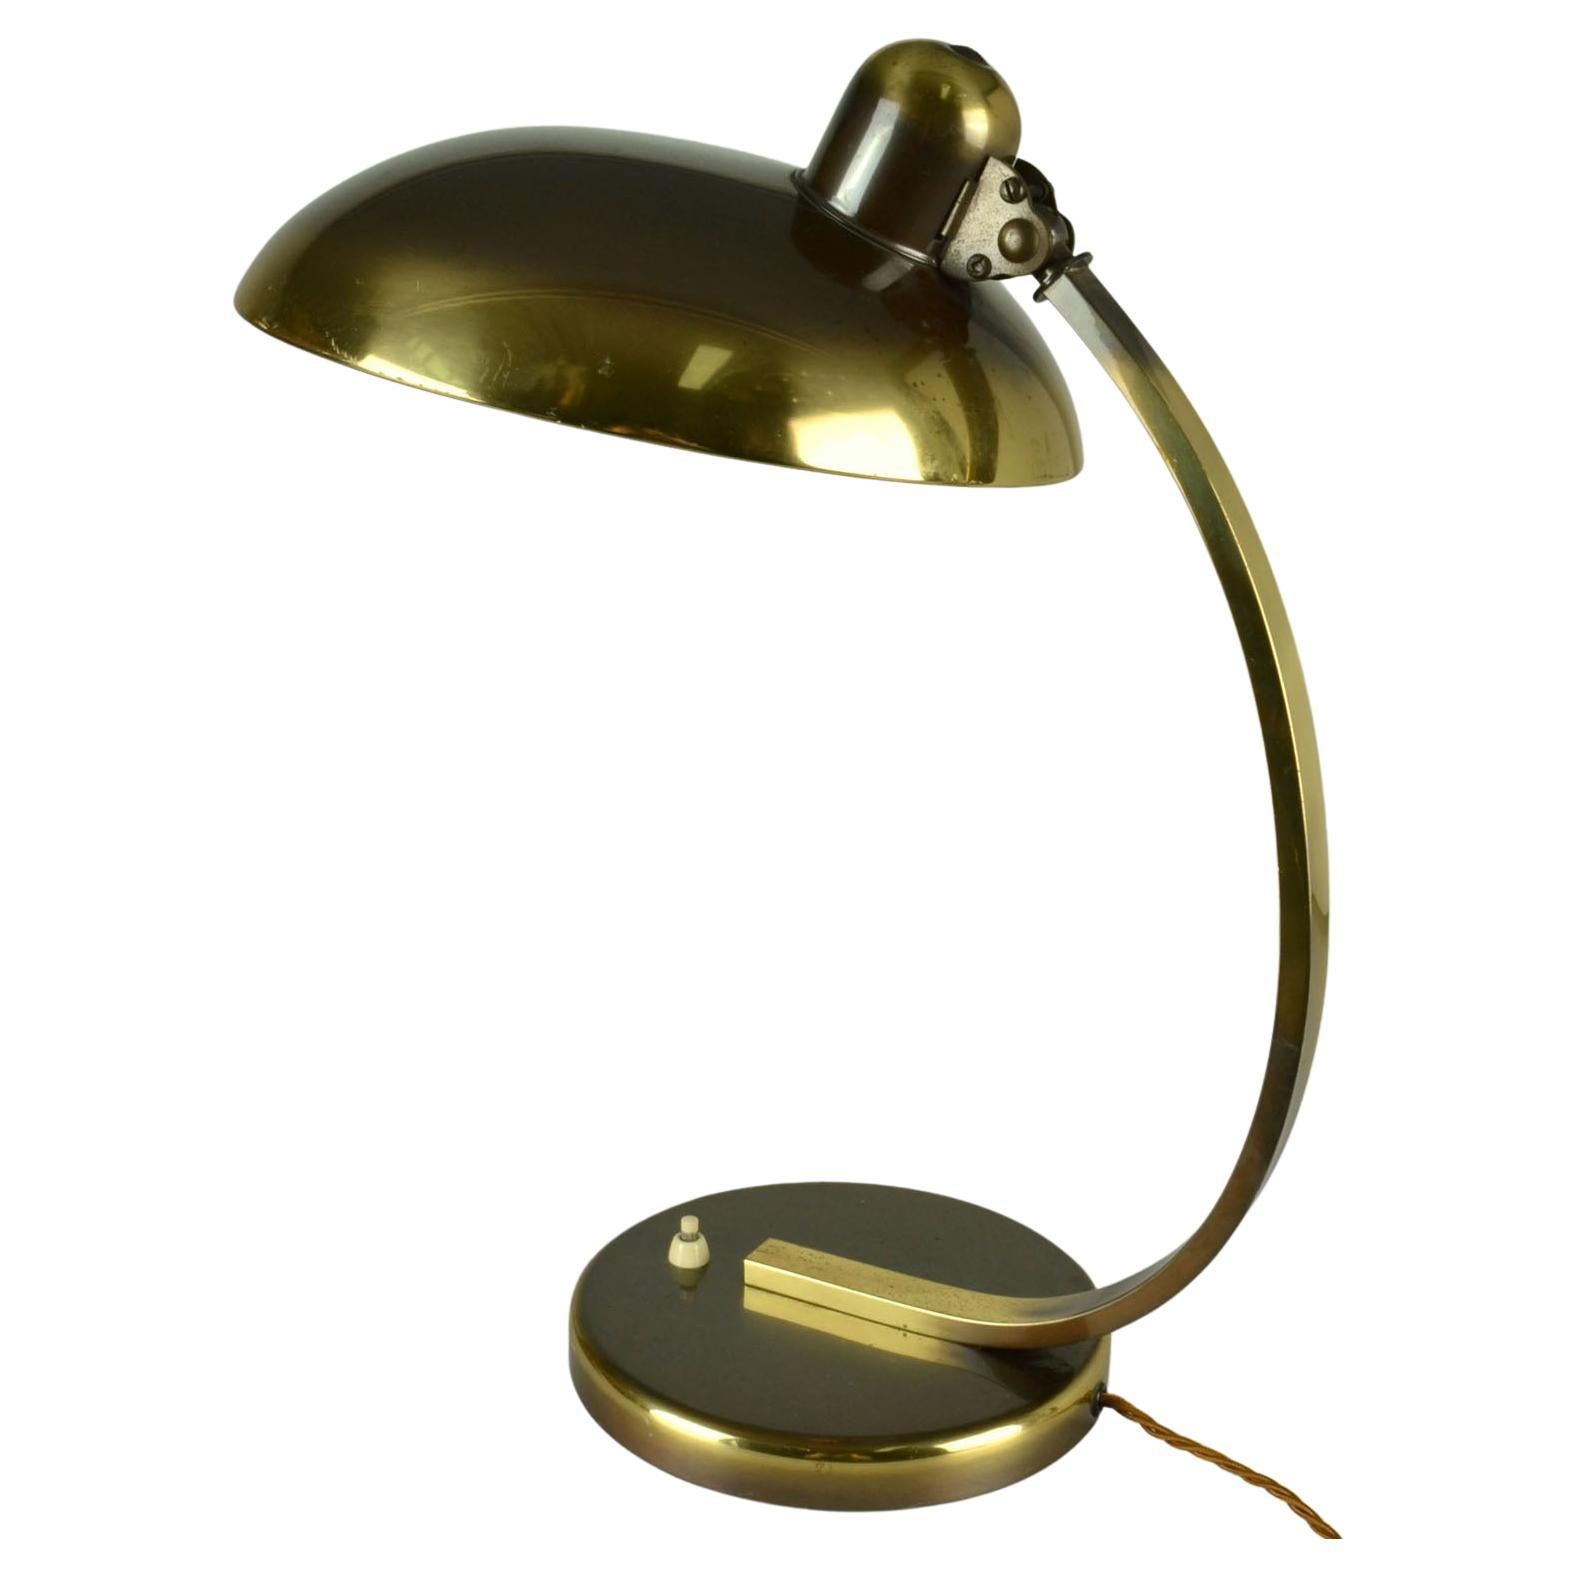 Modernist brass Bauhaus 'President' table or desk lamps with original patina and adjustable shade. Designed by Christian Dell, 1930's manufactured by Kaiser Leuchten, Germany, brass – CHF 1390. 